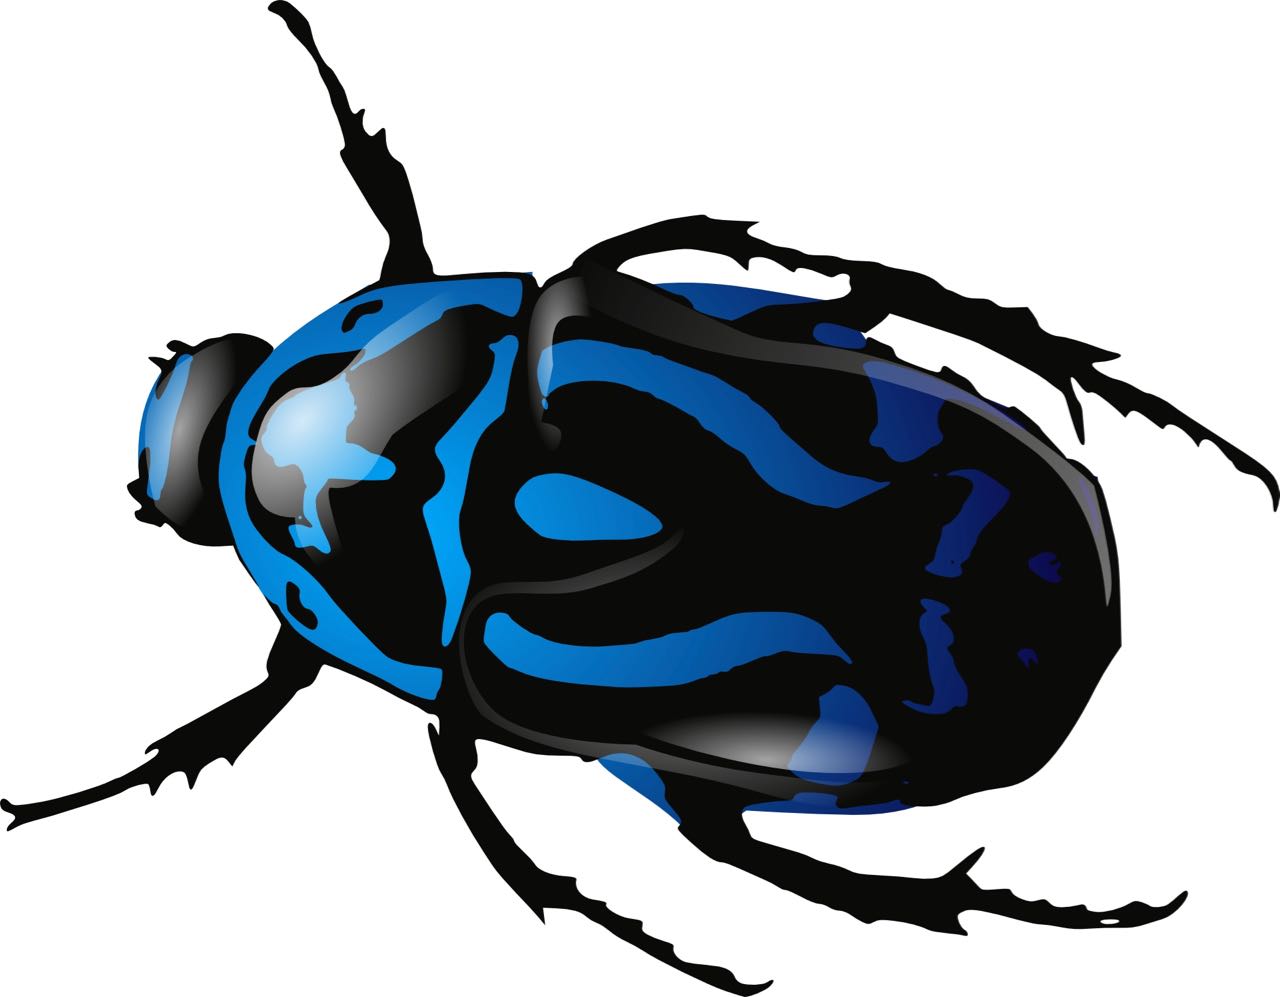 blue and black beetle : Image from pixabay.com REF 34372